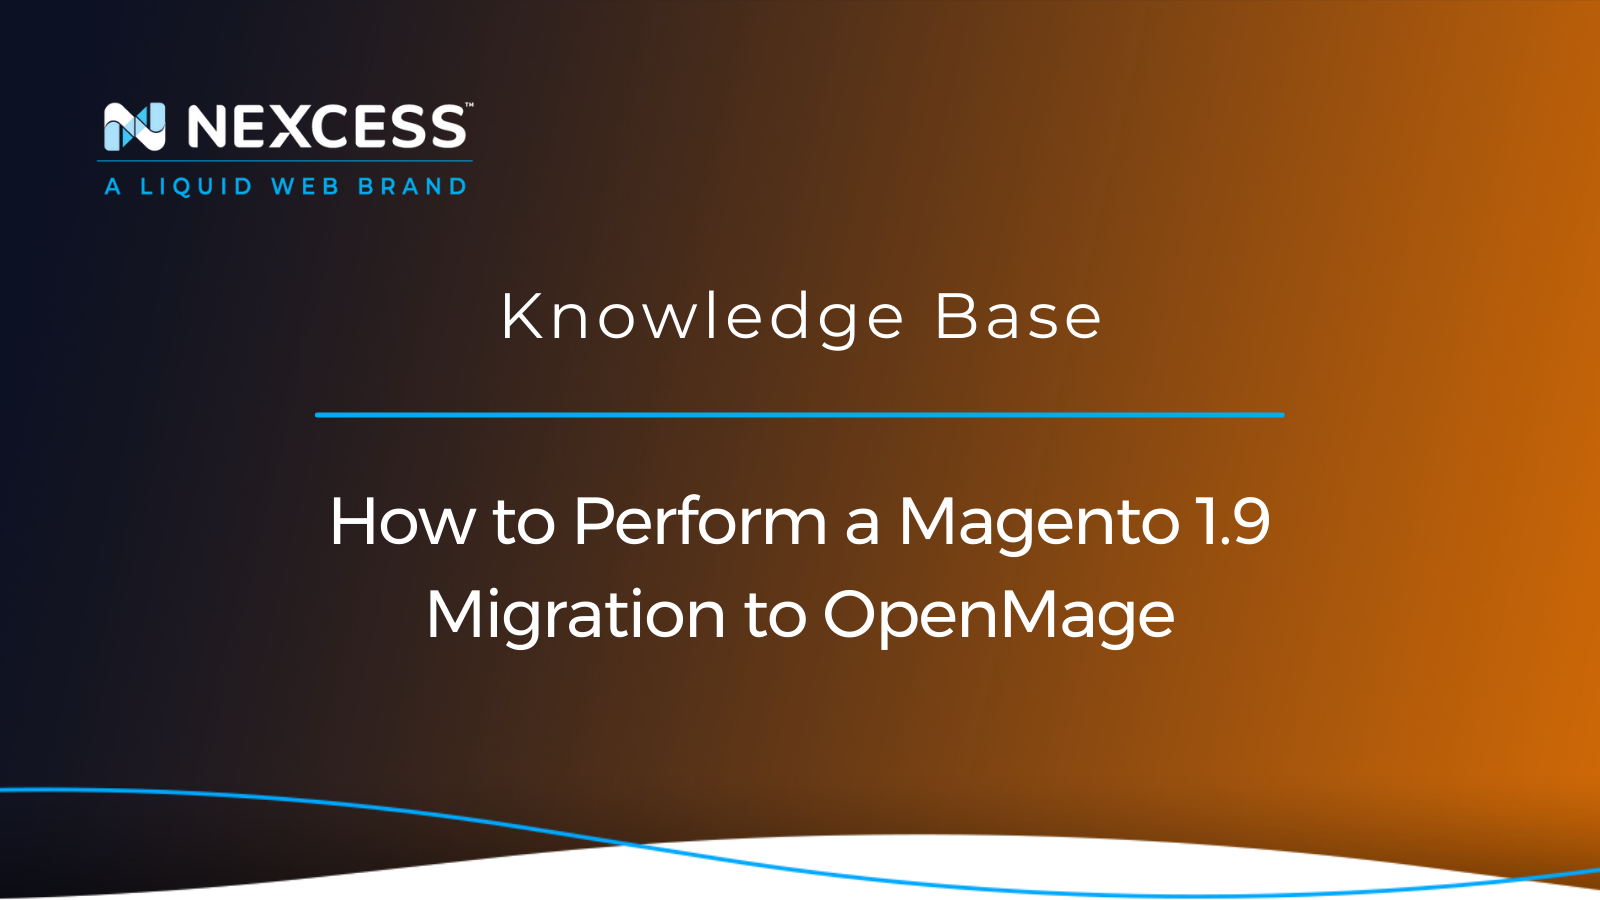 How to Perform a Magento 1.9 Migration to OpenMage